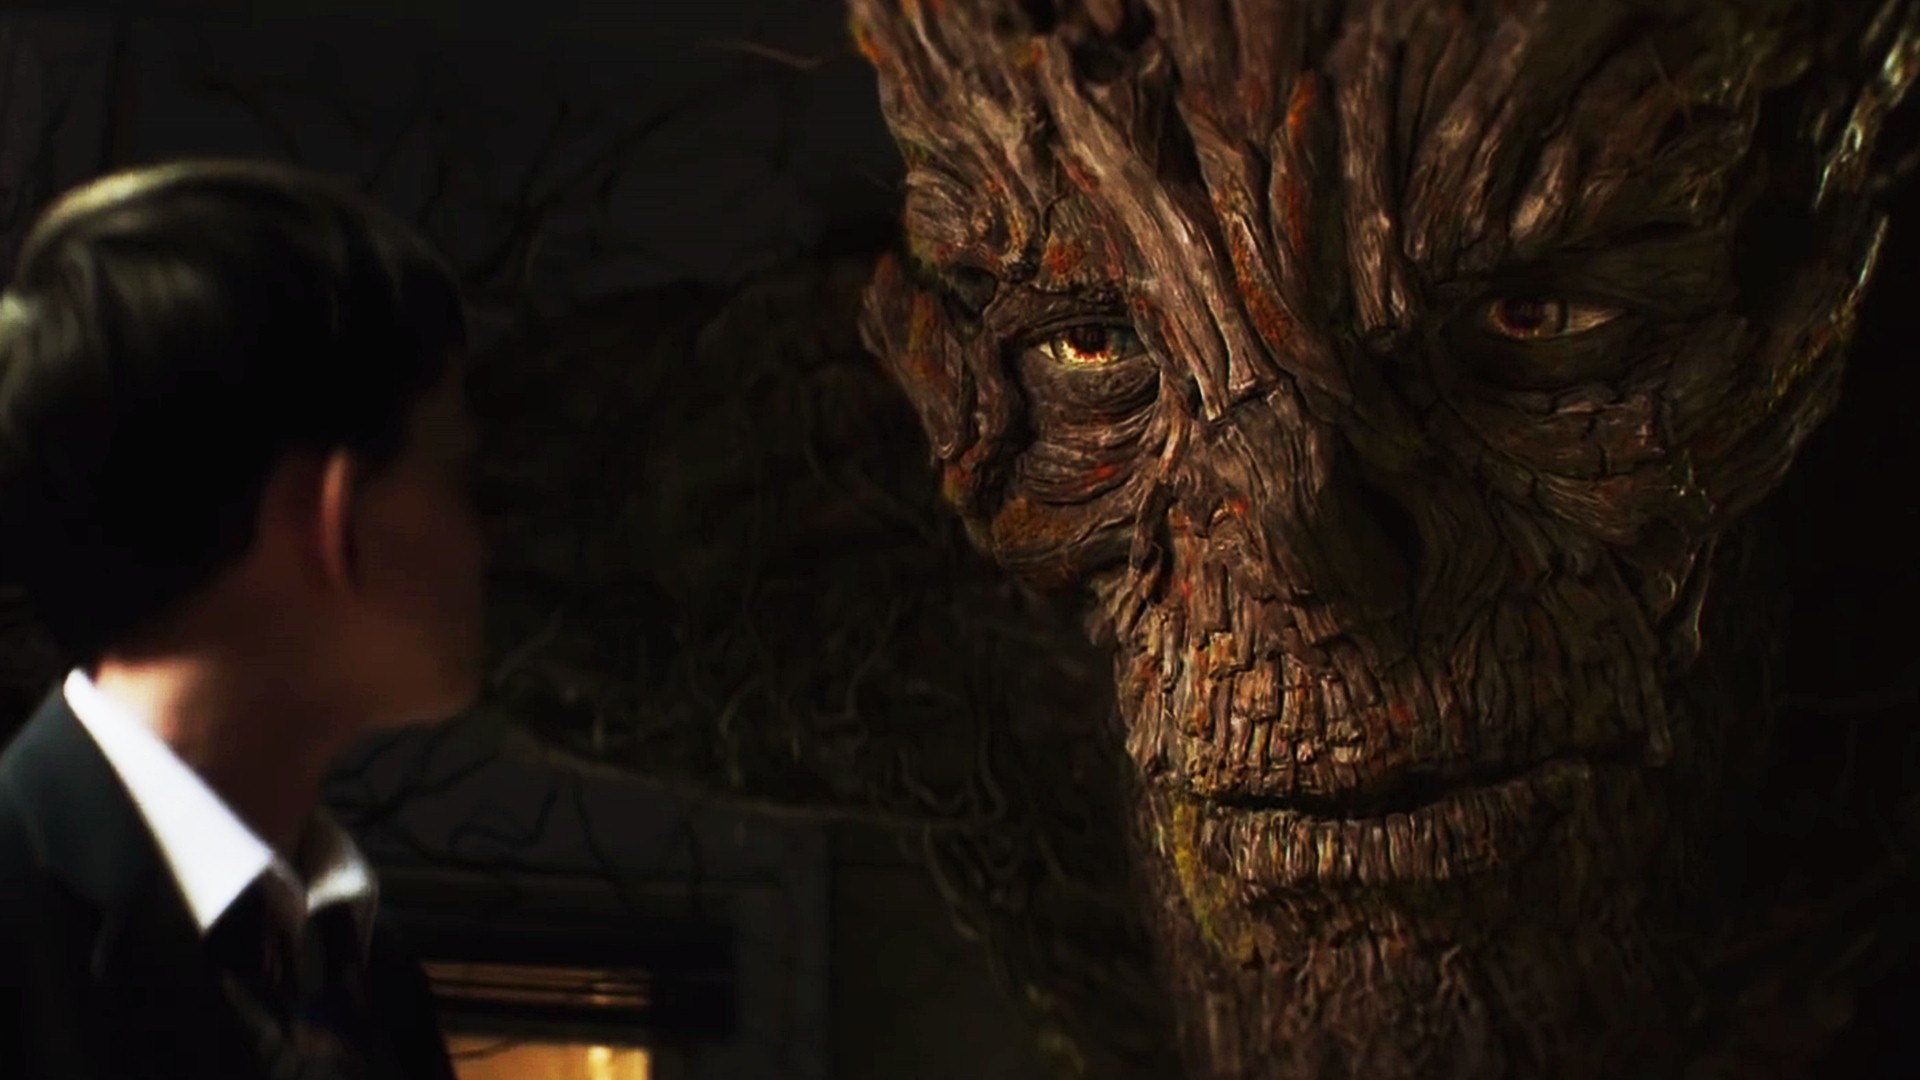 Drop what you’re doing and watch this new ‘A Monster Calls’ trailer